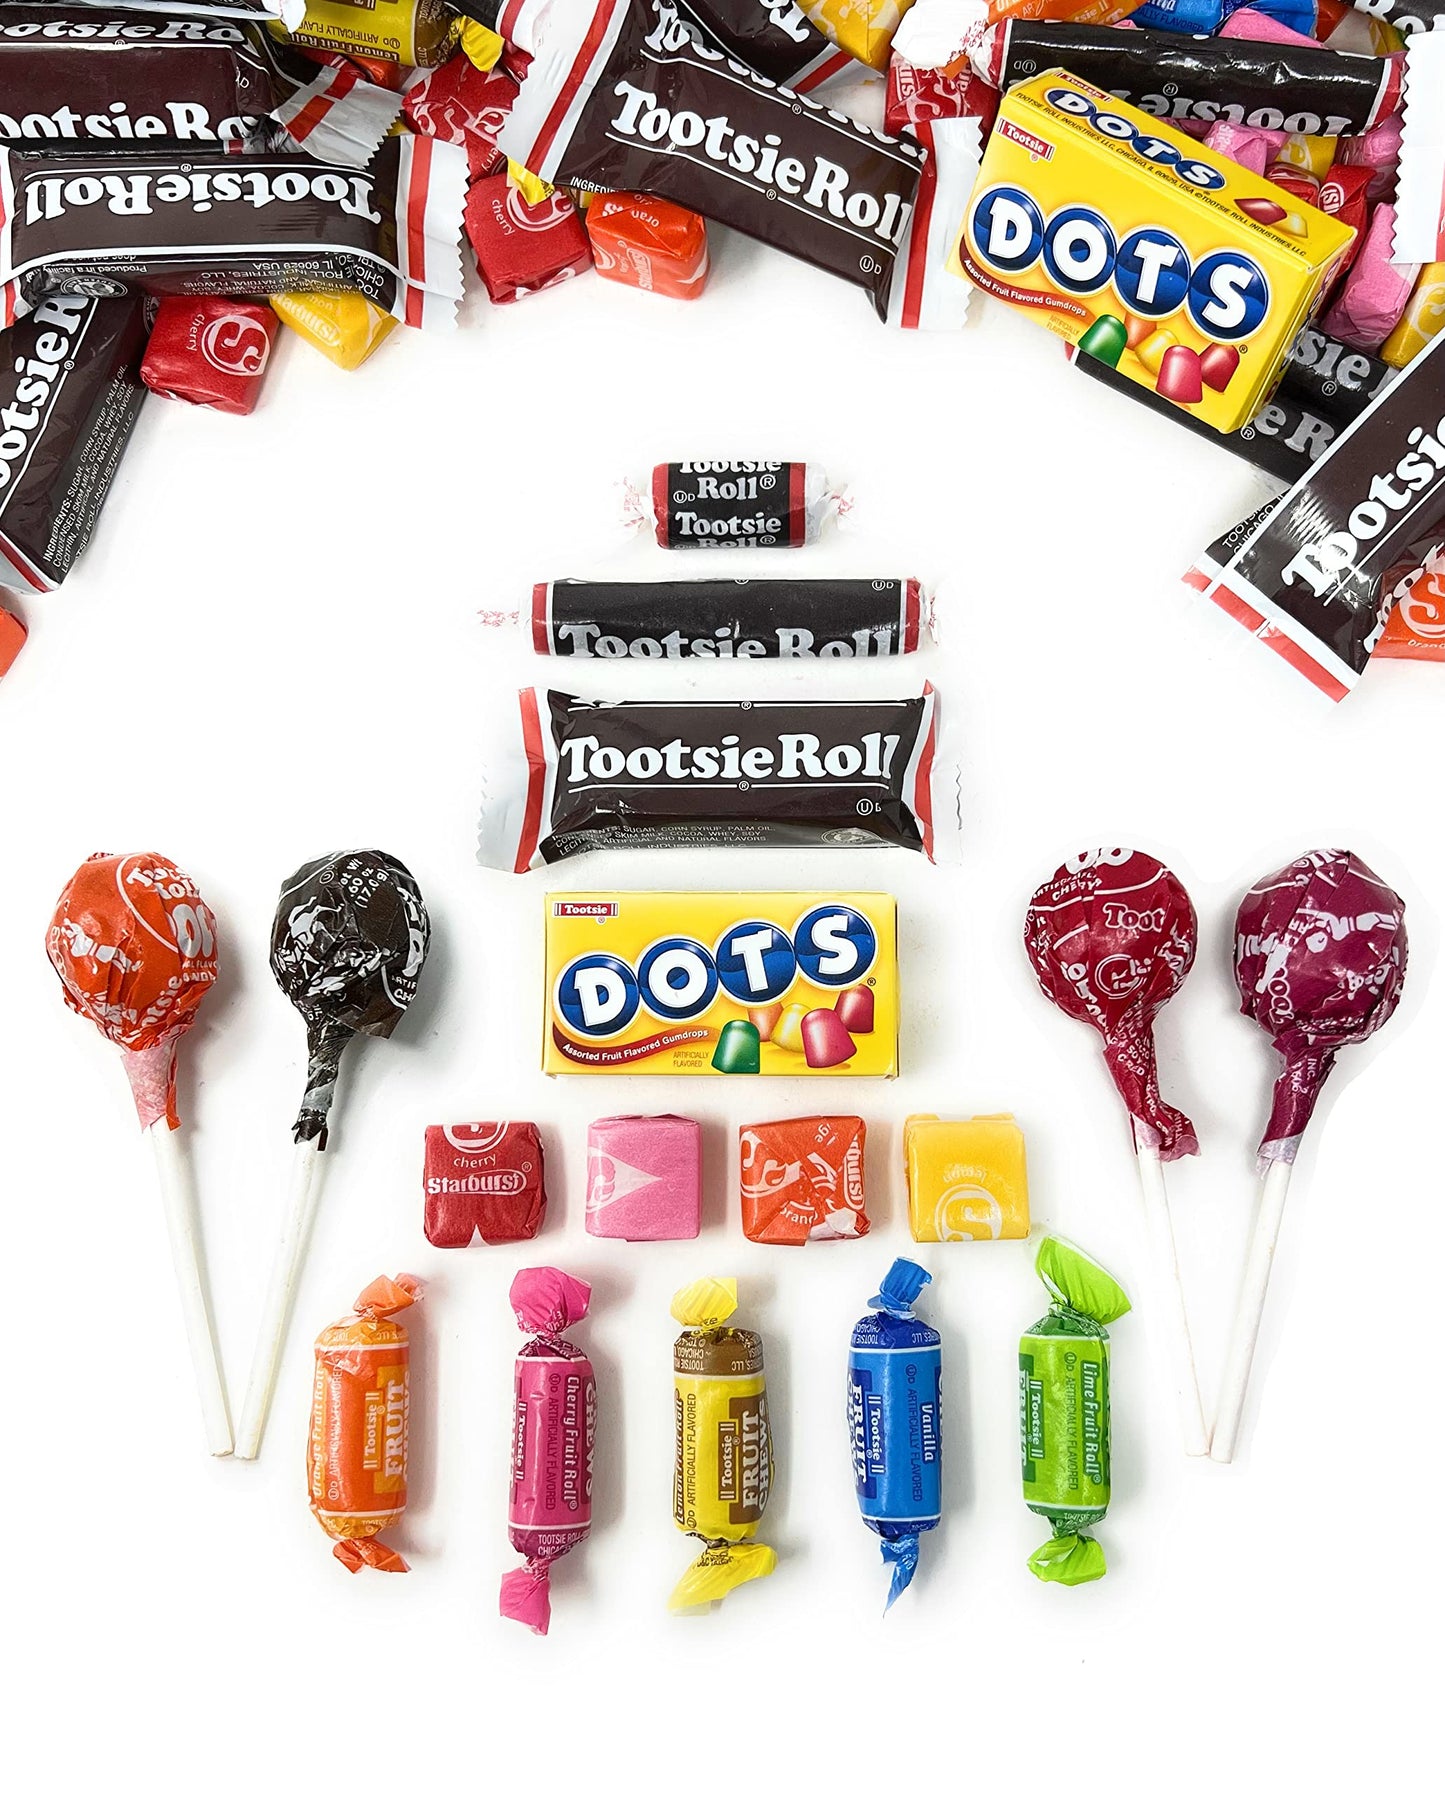 Bulk Fruit and Chocolate Candy Assortment - 8 lbs - Tootsie Roll Fruit Chews and Original Chocolate Midges, Tootsie Pops, Starburst and Dots (128 Oz)